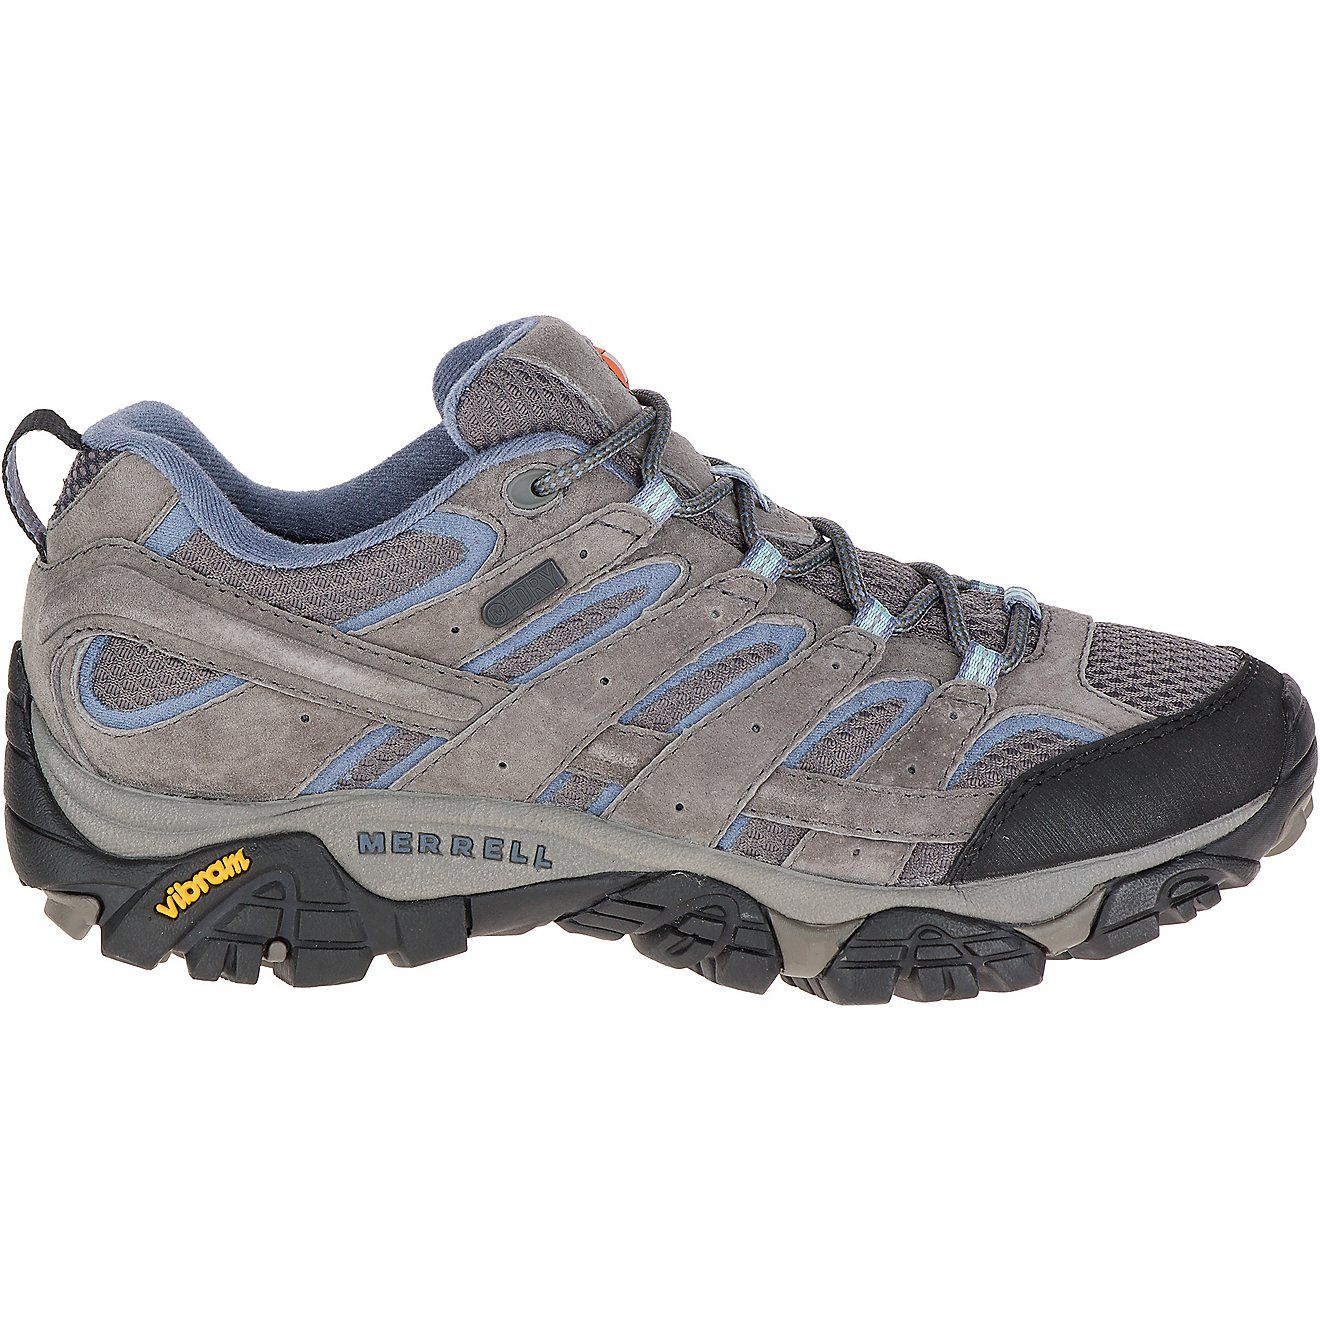 Merrell Women's Moab 2 Waterproof Hiking Shoes | Academy Sports + Outdoor Affiliate